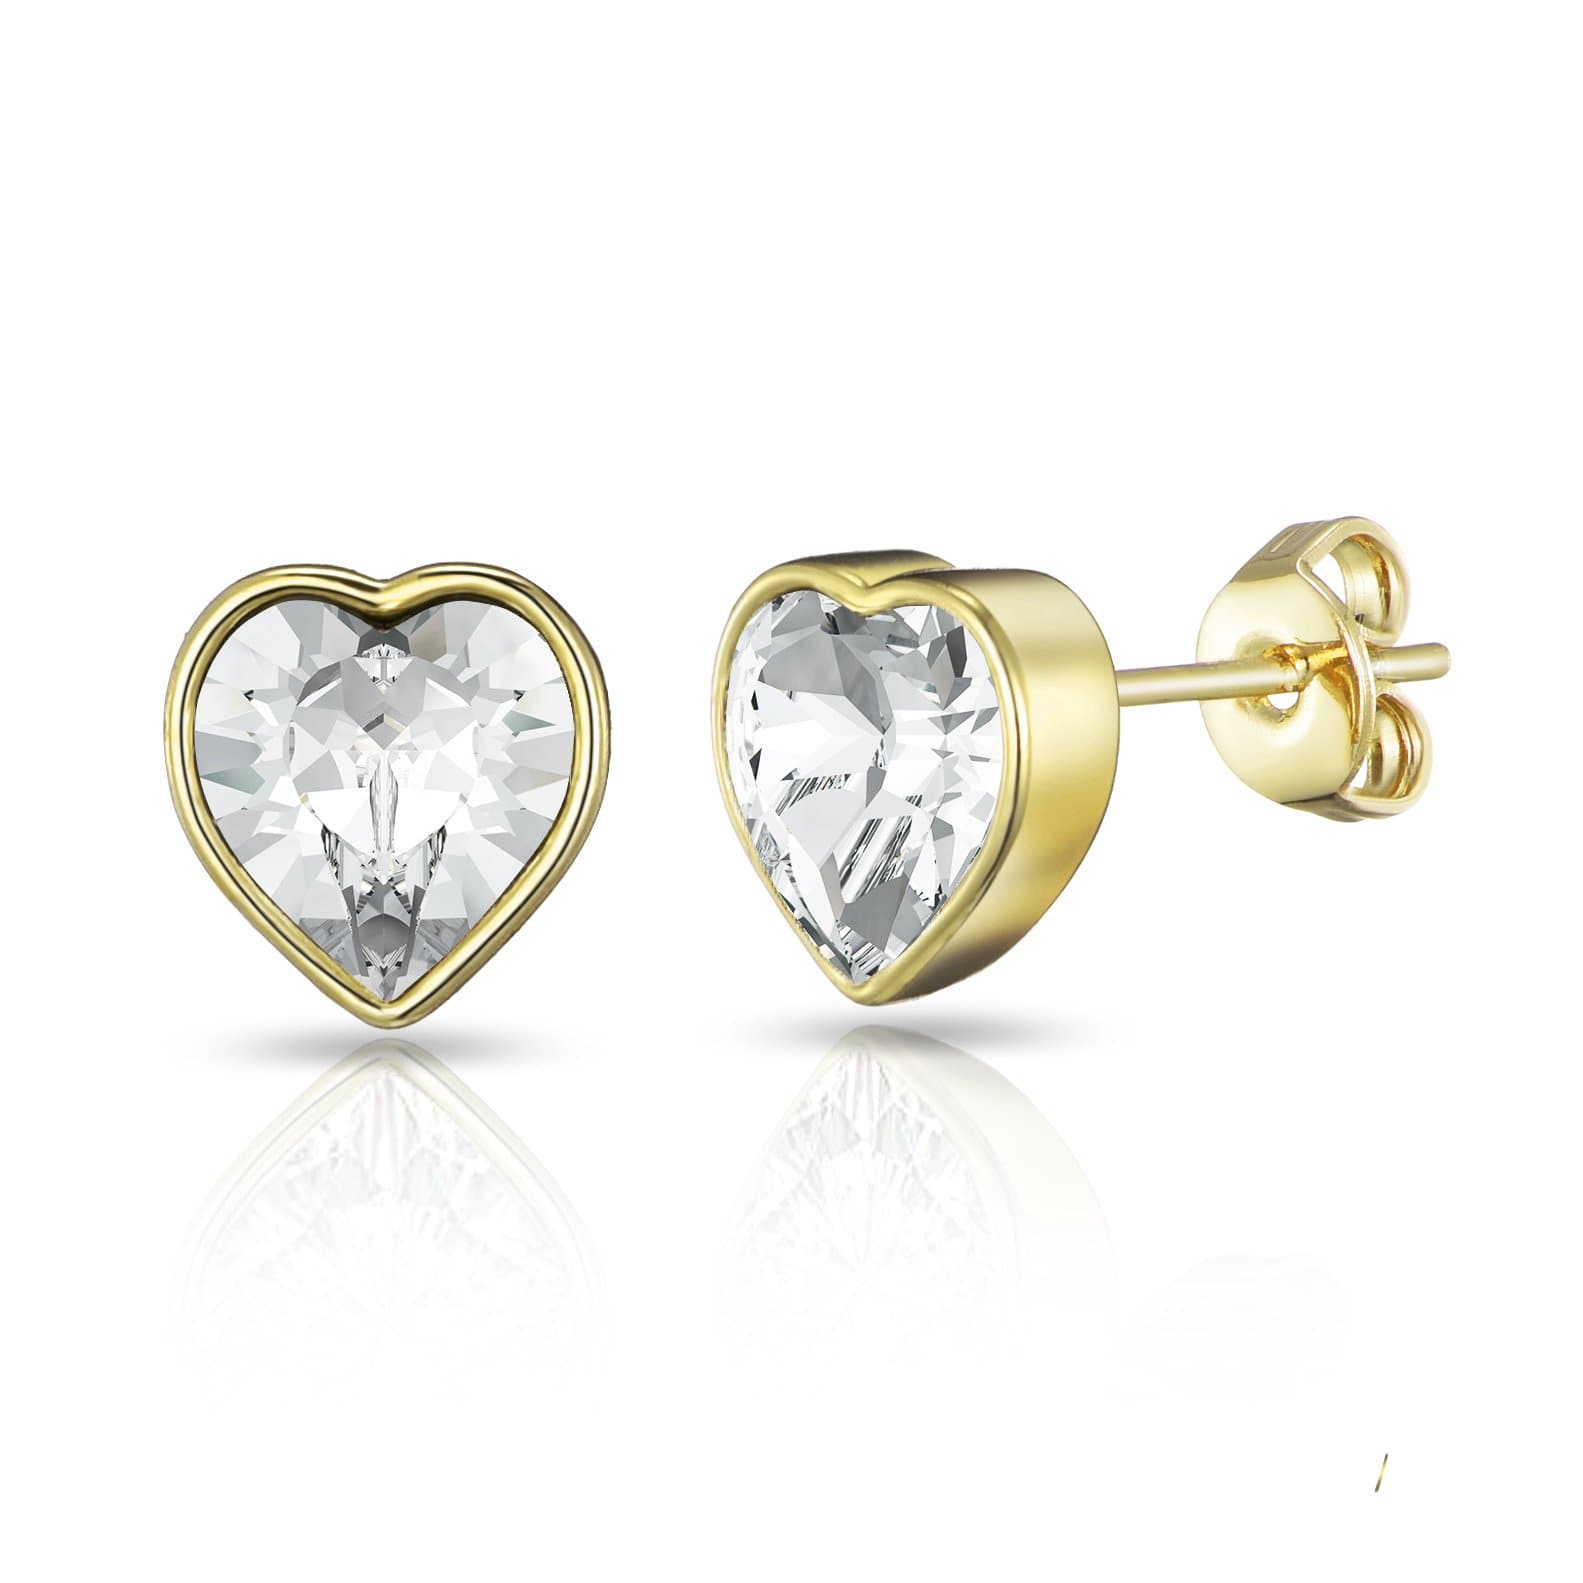 Gold Plated Bezel set Heart Earrings Created with Zircondia® Crystals